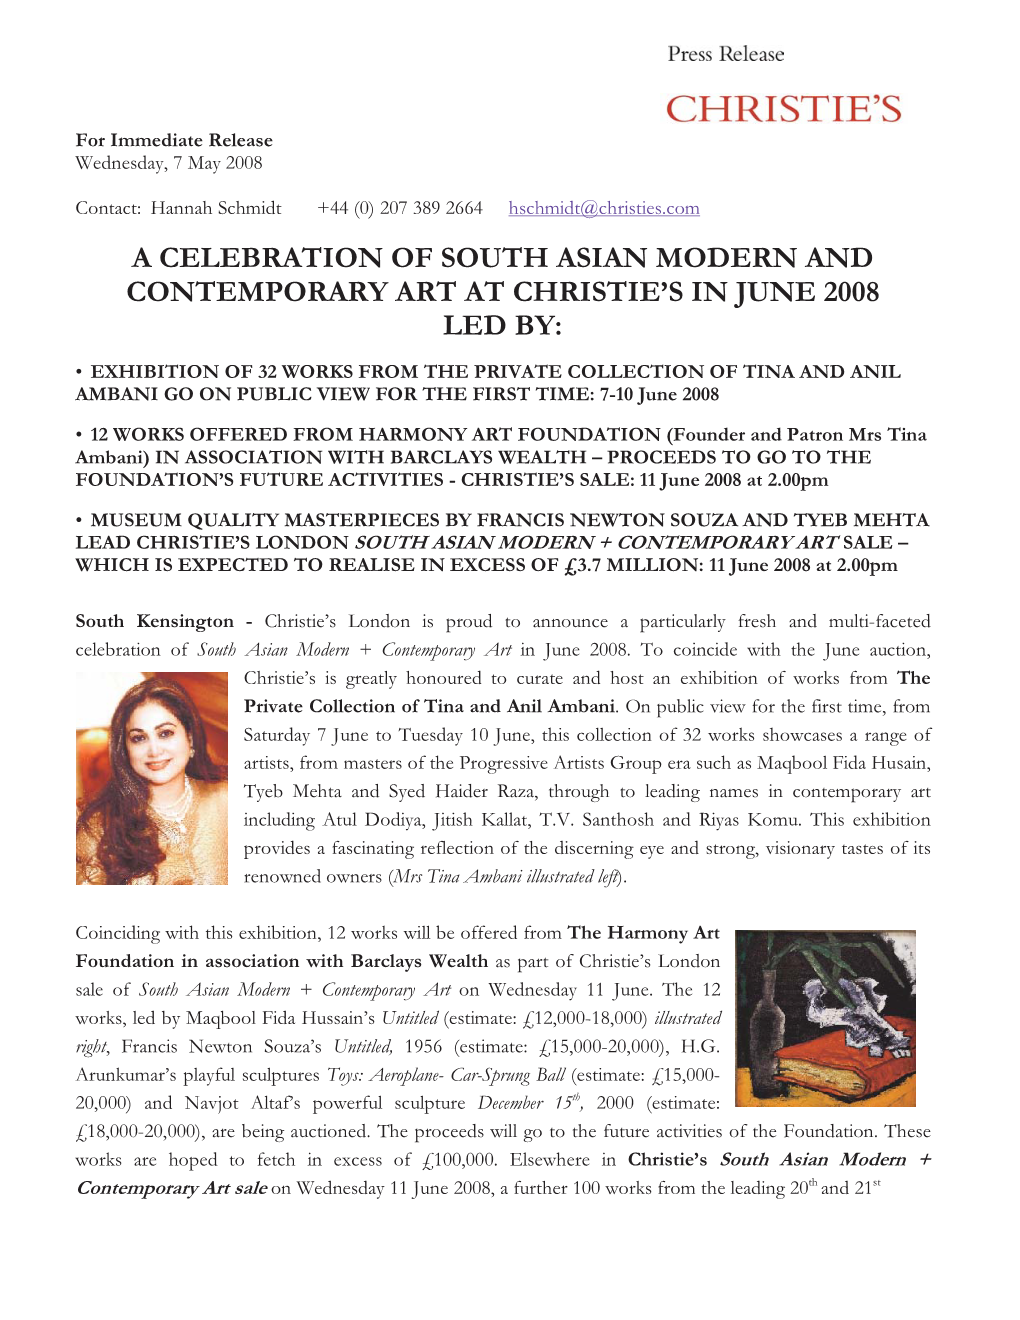 A Celebration of South Asian Modern and Contemporary Art at Christie's in June 2008 Led